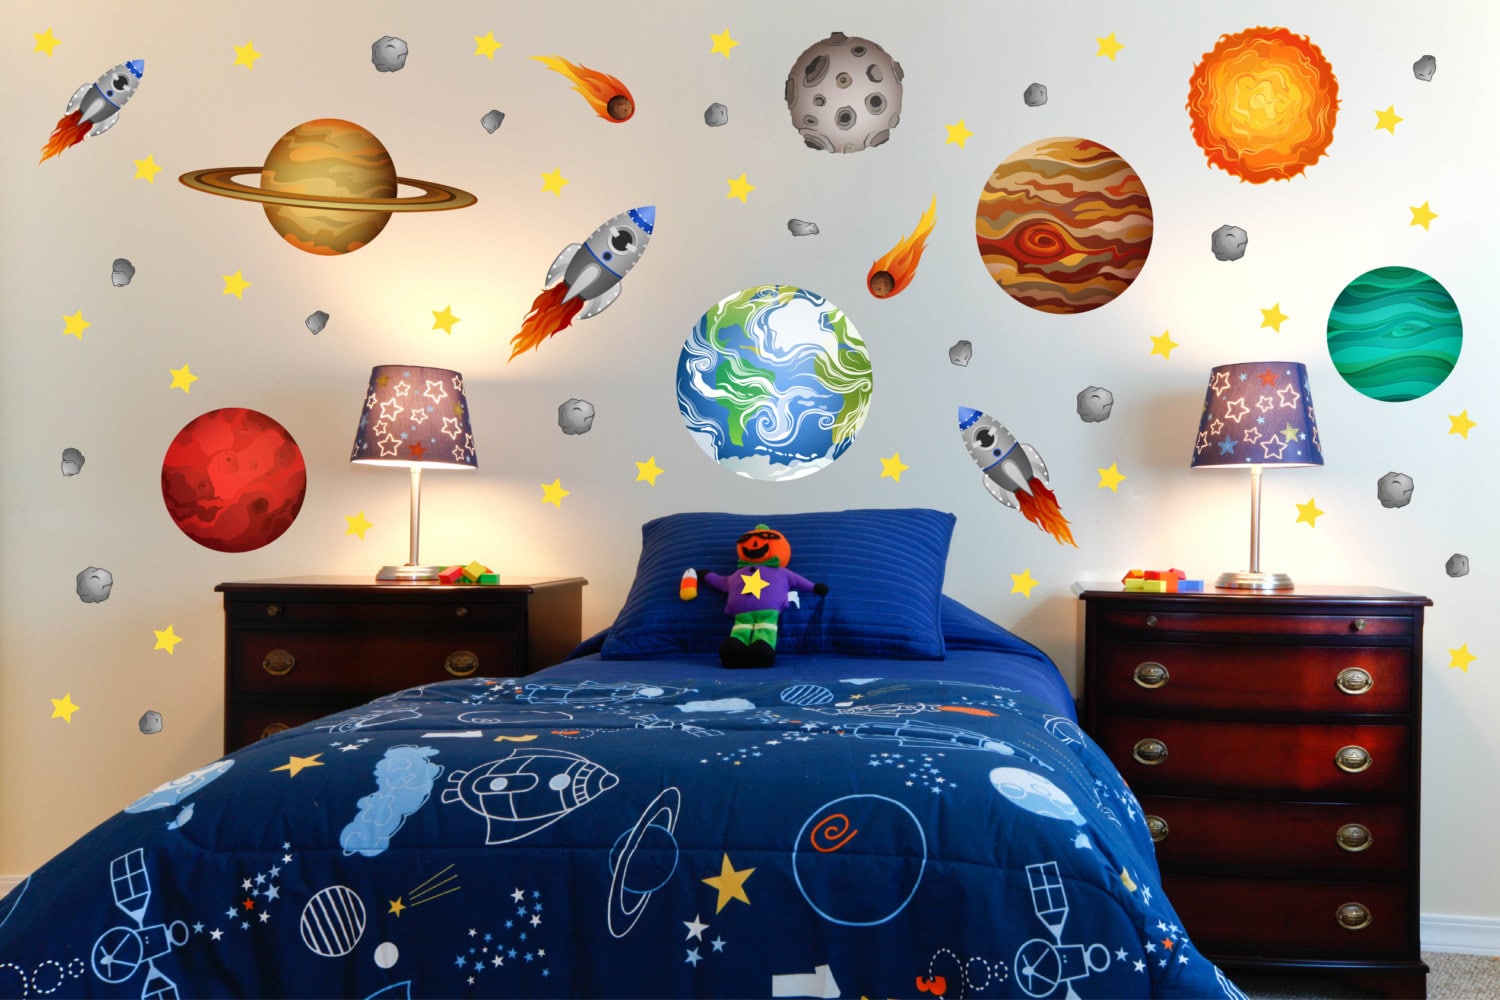 Space Solar System Outer Planets Wall Decal Kids Room Bedroom Sticker Decor CB